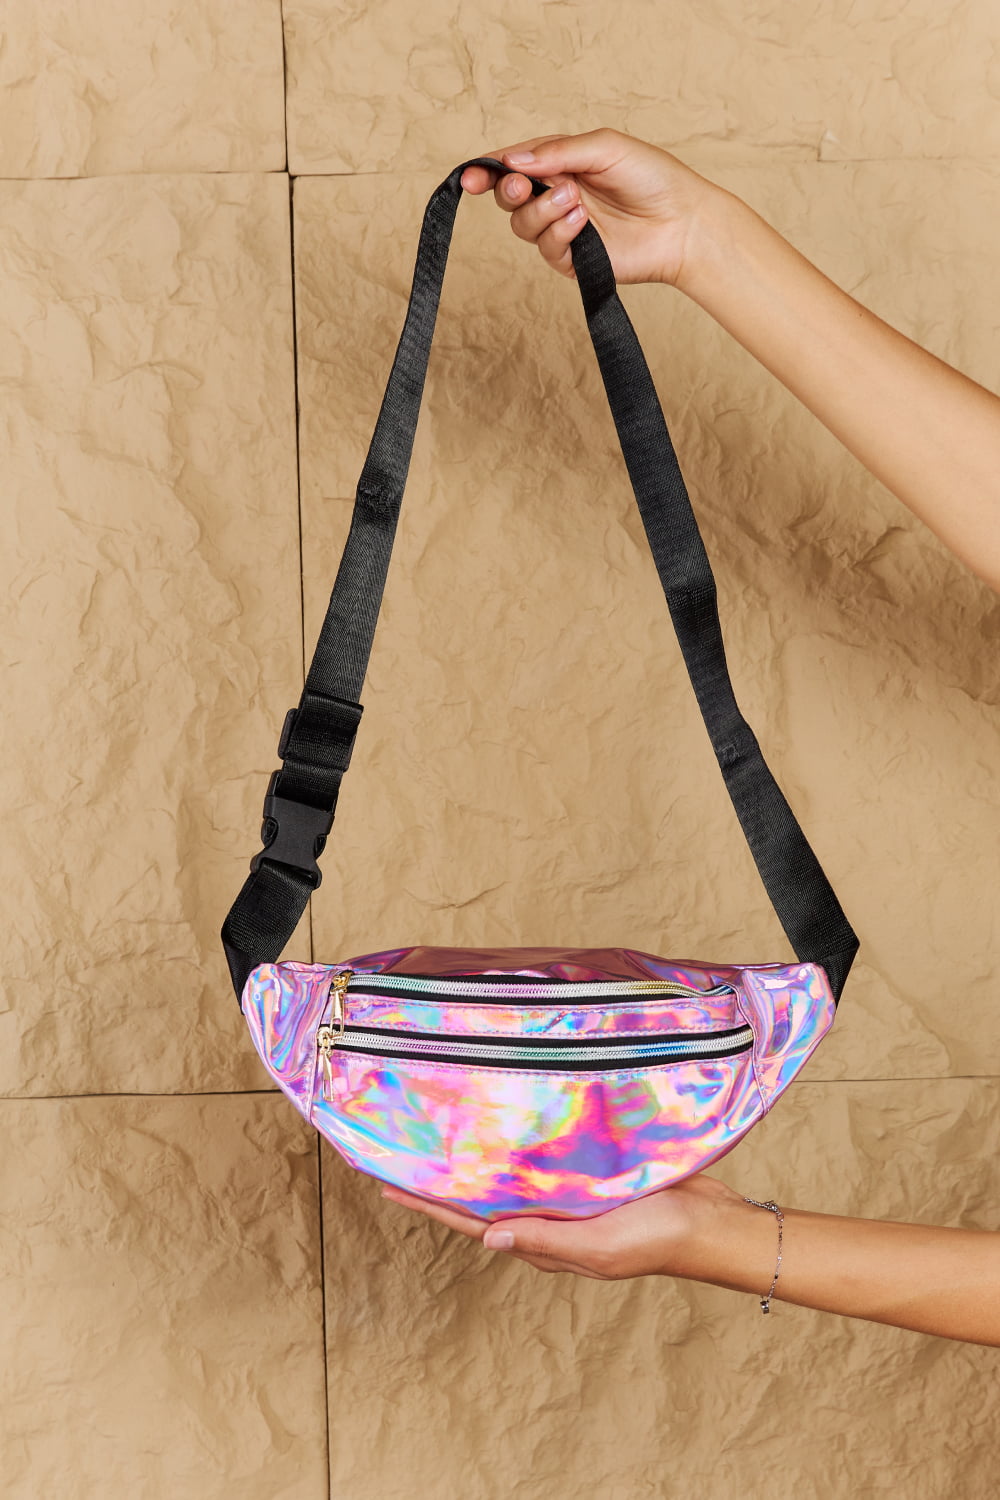 Fame Good Vibrations Holographic Double Zipper Fanny Pack in Hot Pink - sling bag at TFC&H Co.